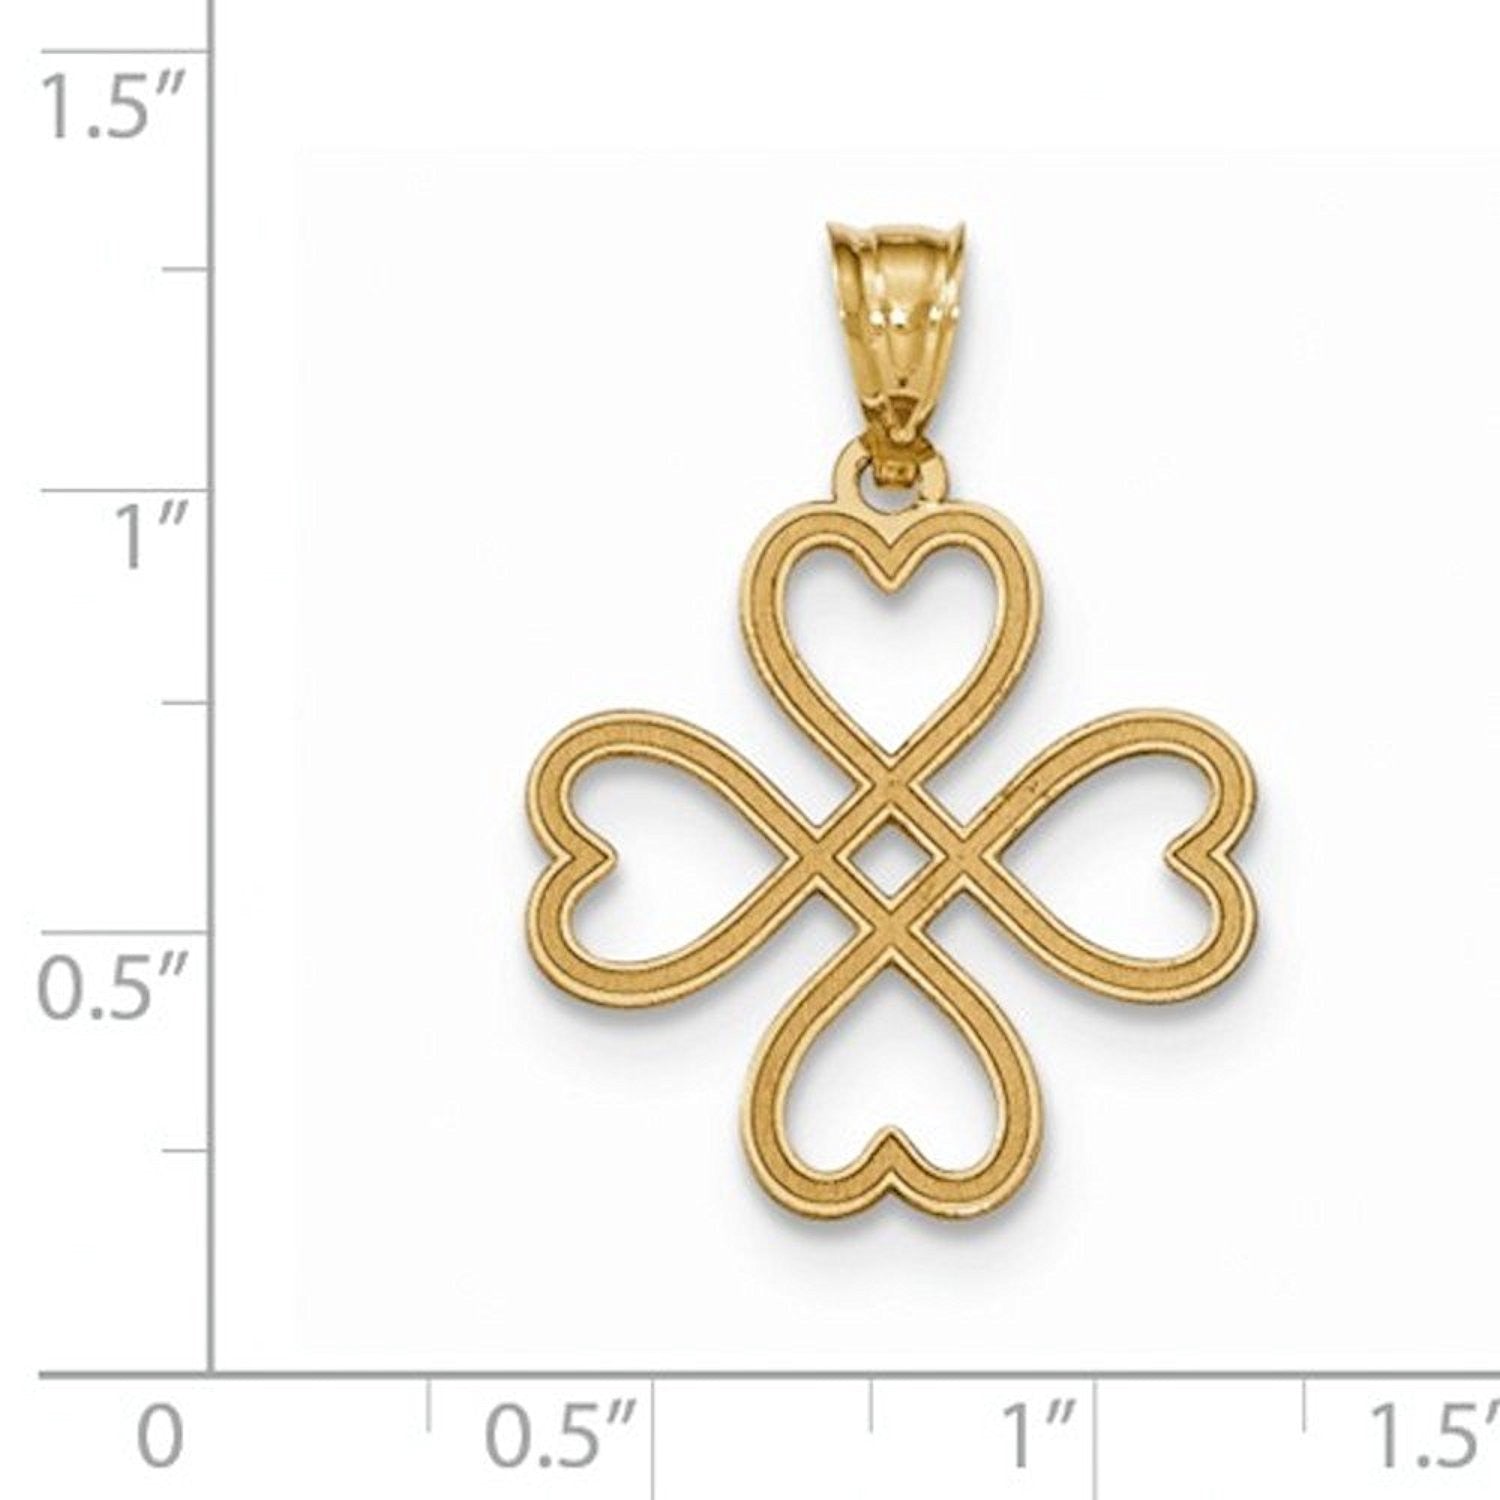 14k Yellow Gold Good Luck Four Leaf Clover Pendant Charm